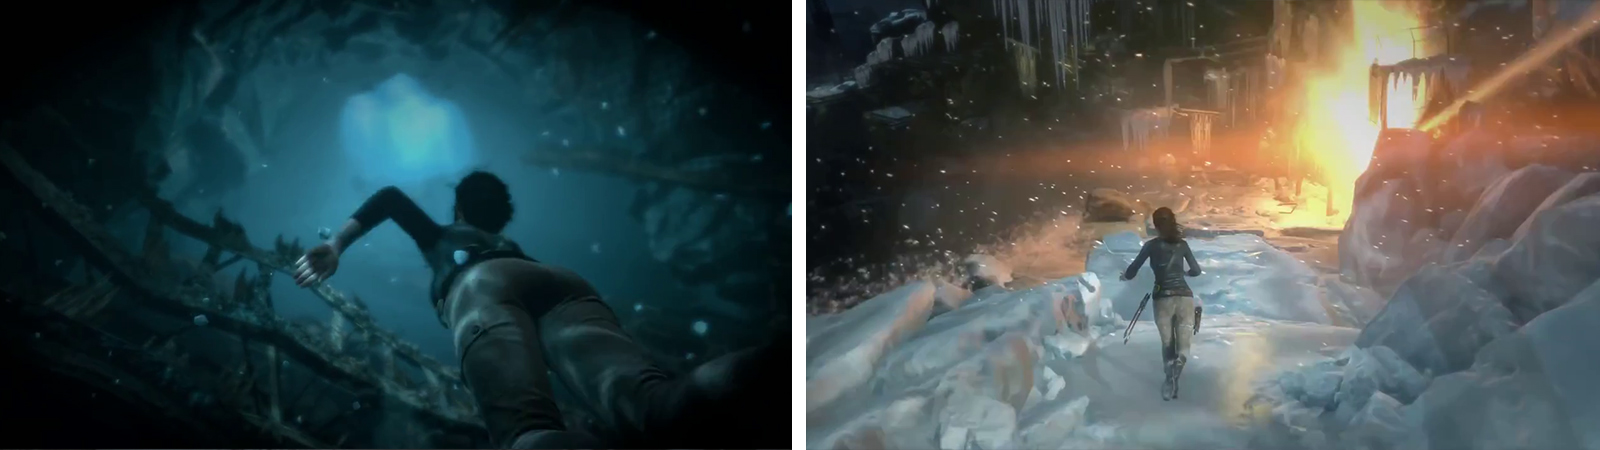 Swim to the crack in the ice (left) and then run along the set path (right) until you escape the helicopter.